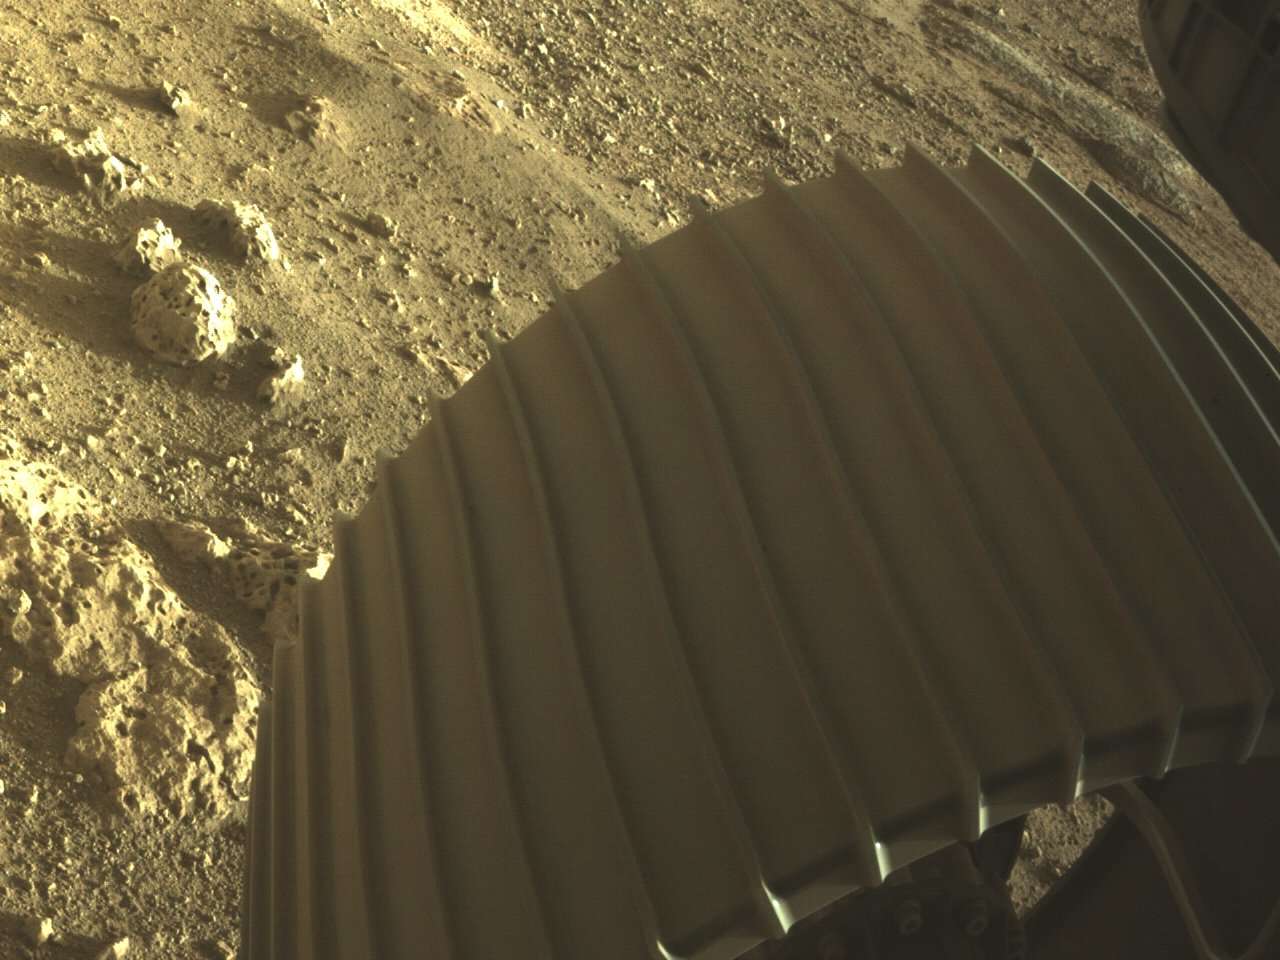 One of the Perseverance rover’s wheels seen in color on Mars. Note the rocks around it; scientists are very curious if they are volcanic or sedimentary in origin. Credit: NASA/JPL-Caltech